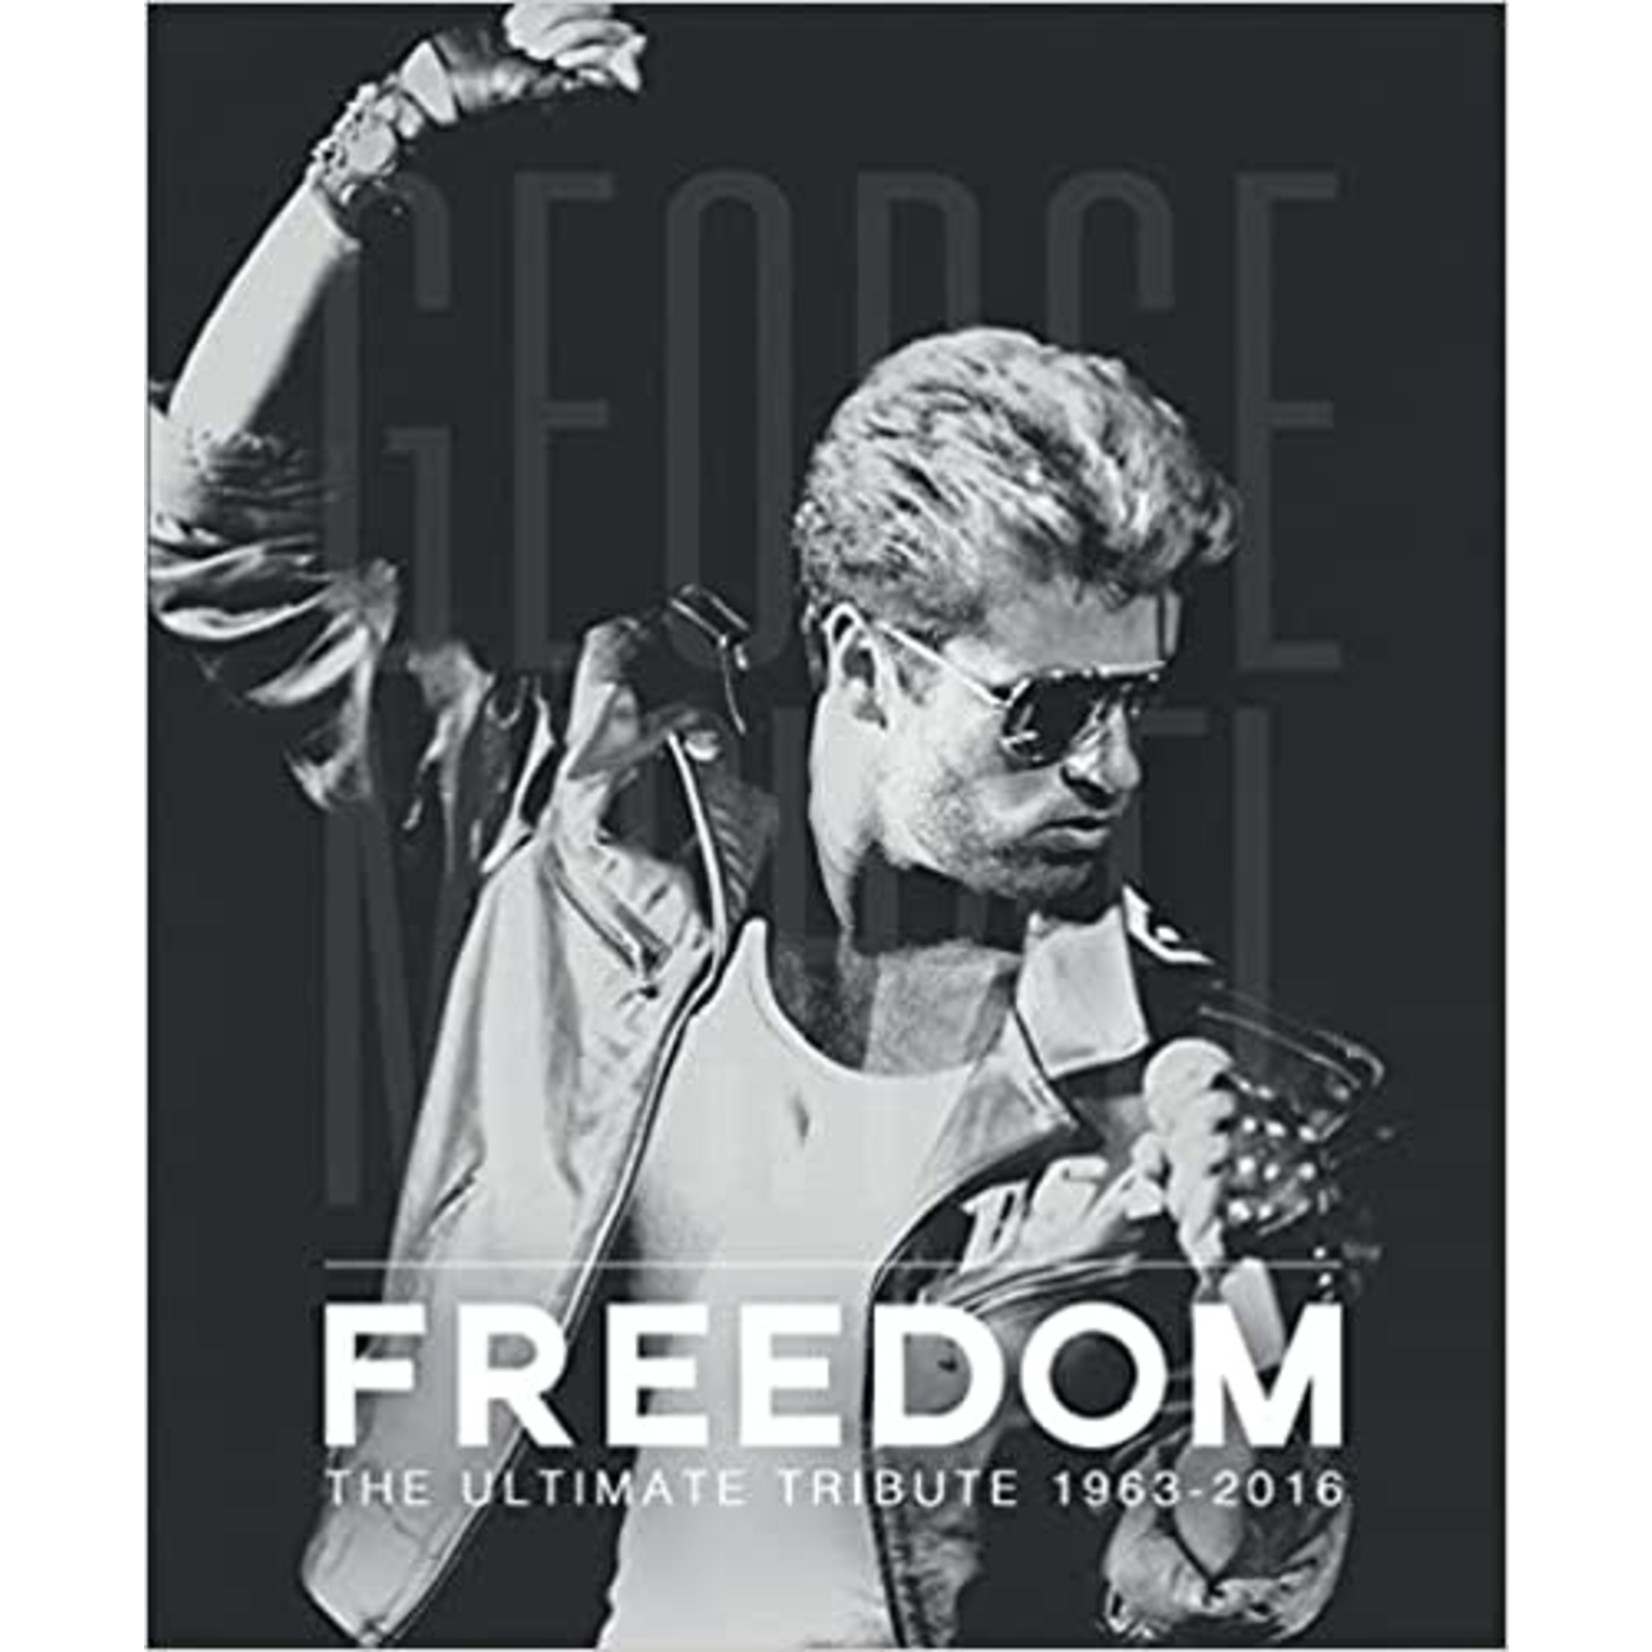 George Michael - Freedom: The Ultimate Tribute 1963-2016 [Book]